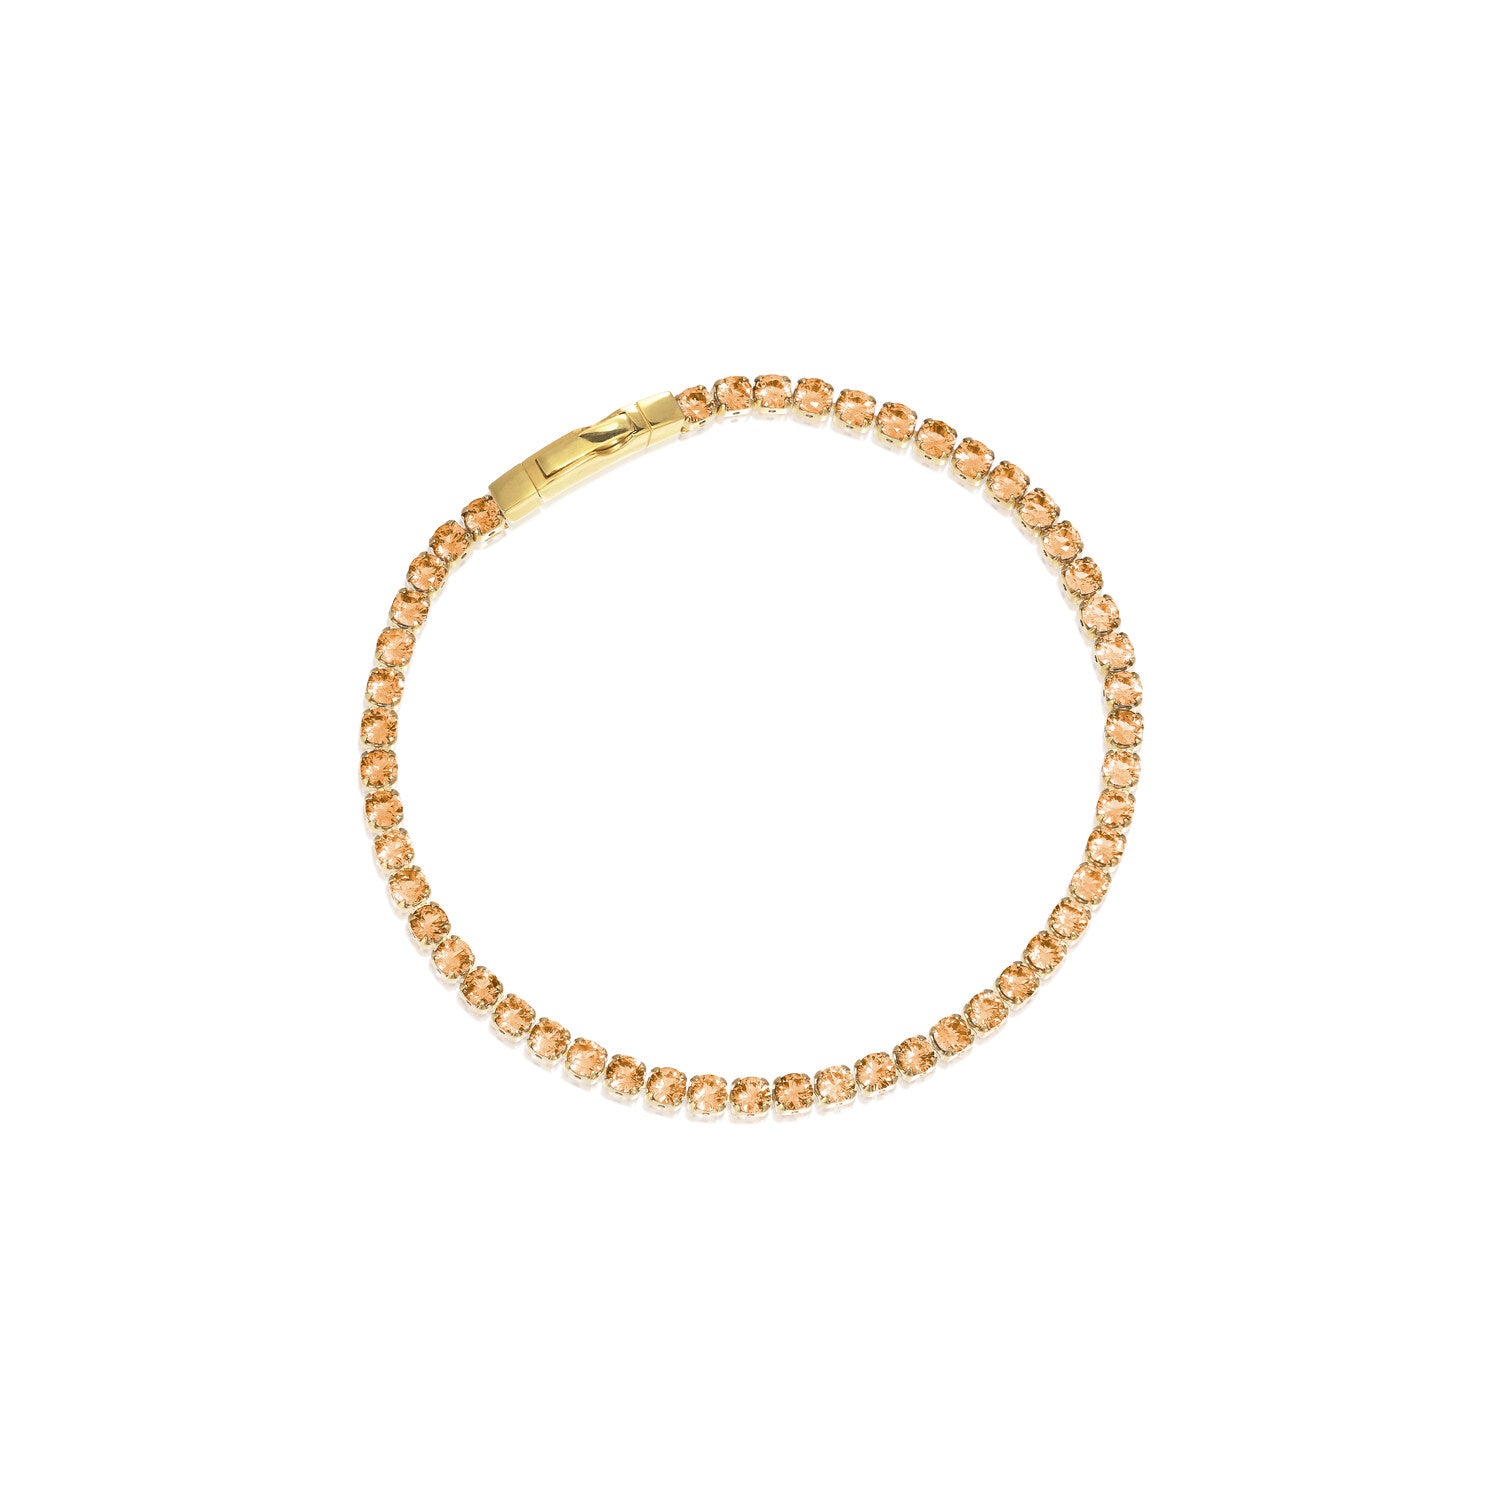 18K gold plated | Champagne | 18 cm, 18K gold plated | Champagne | 19 cm, 18K gold plated | Champagne | 17 cm, 18K gold plated | Champagne | 16 cm